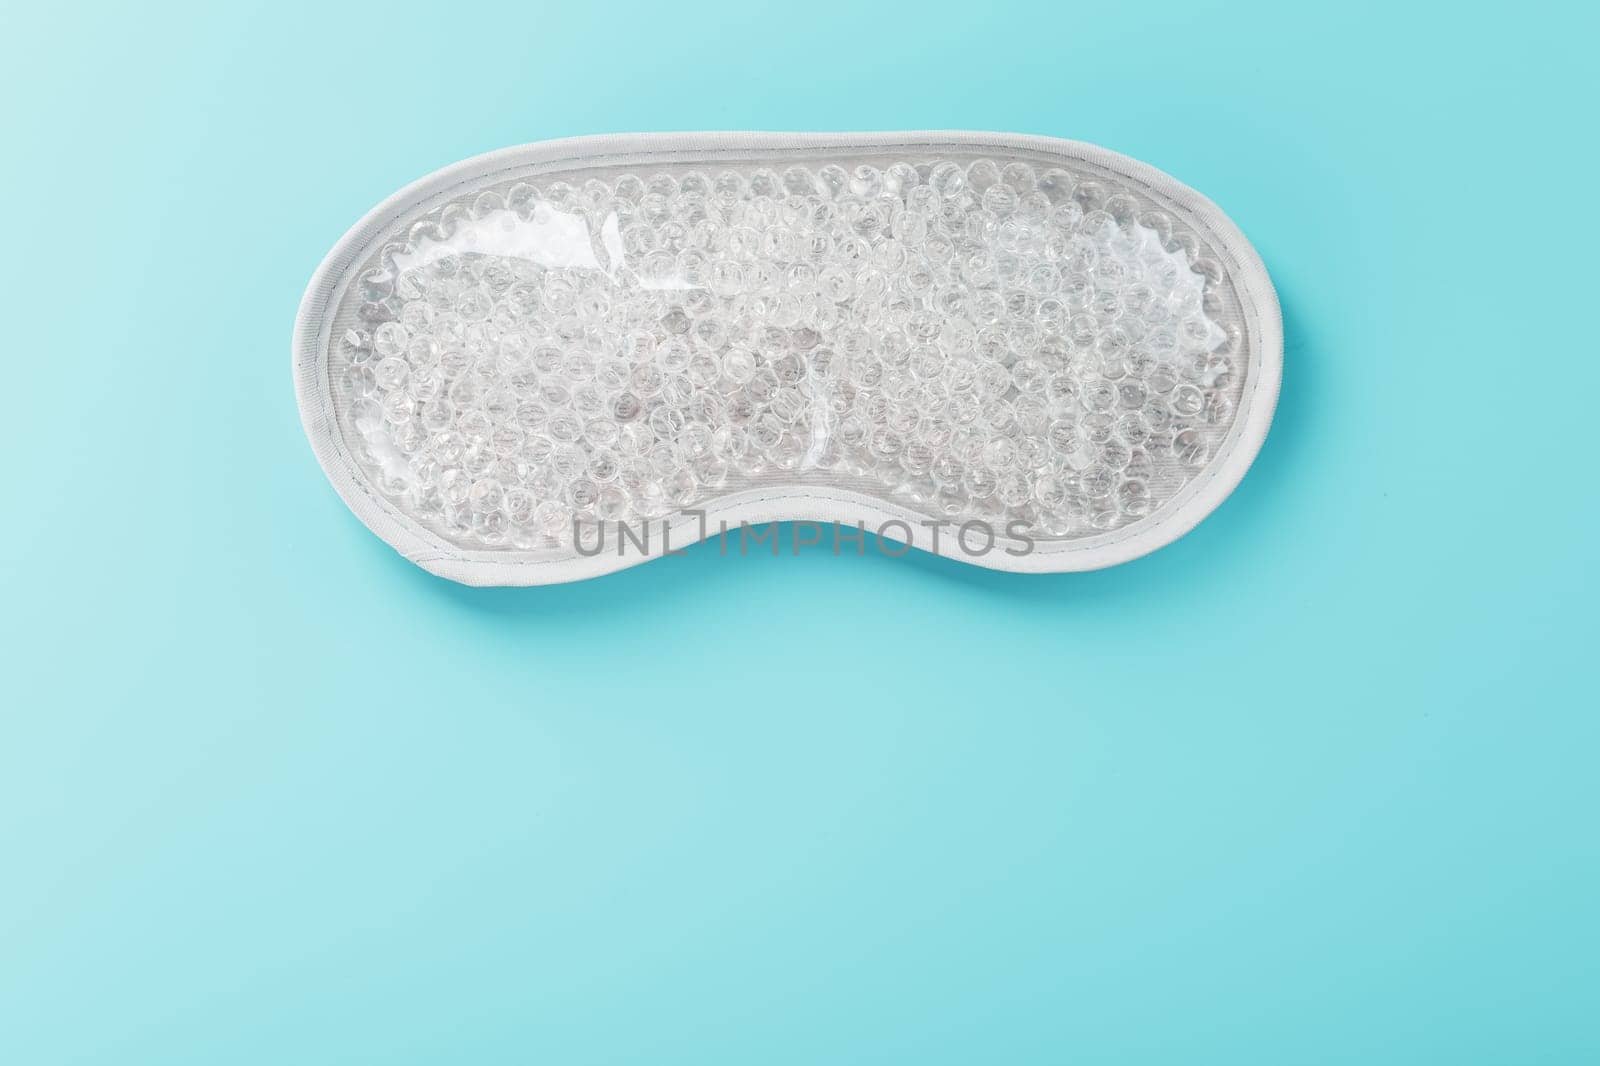 Eye mask with transparent gel balls inside on a blue background. A remedy for wrinkles and aging.